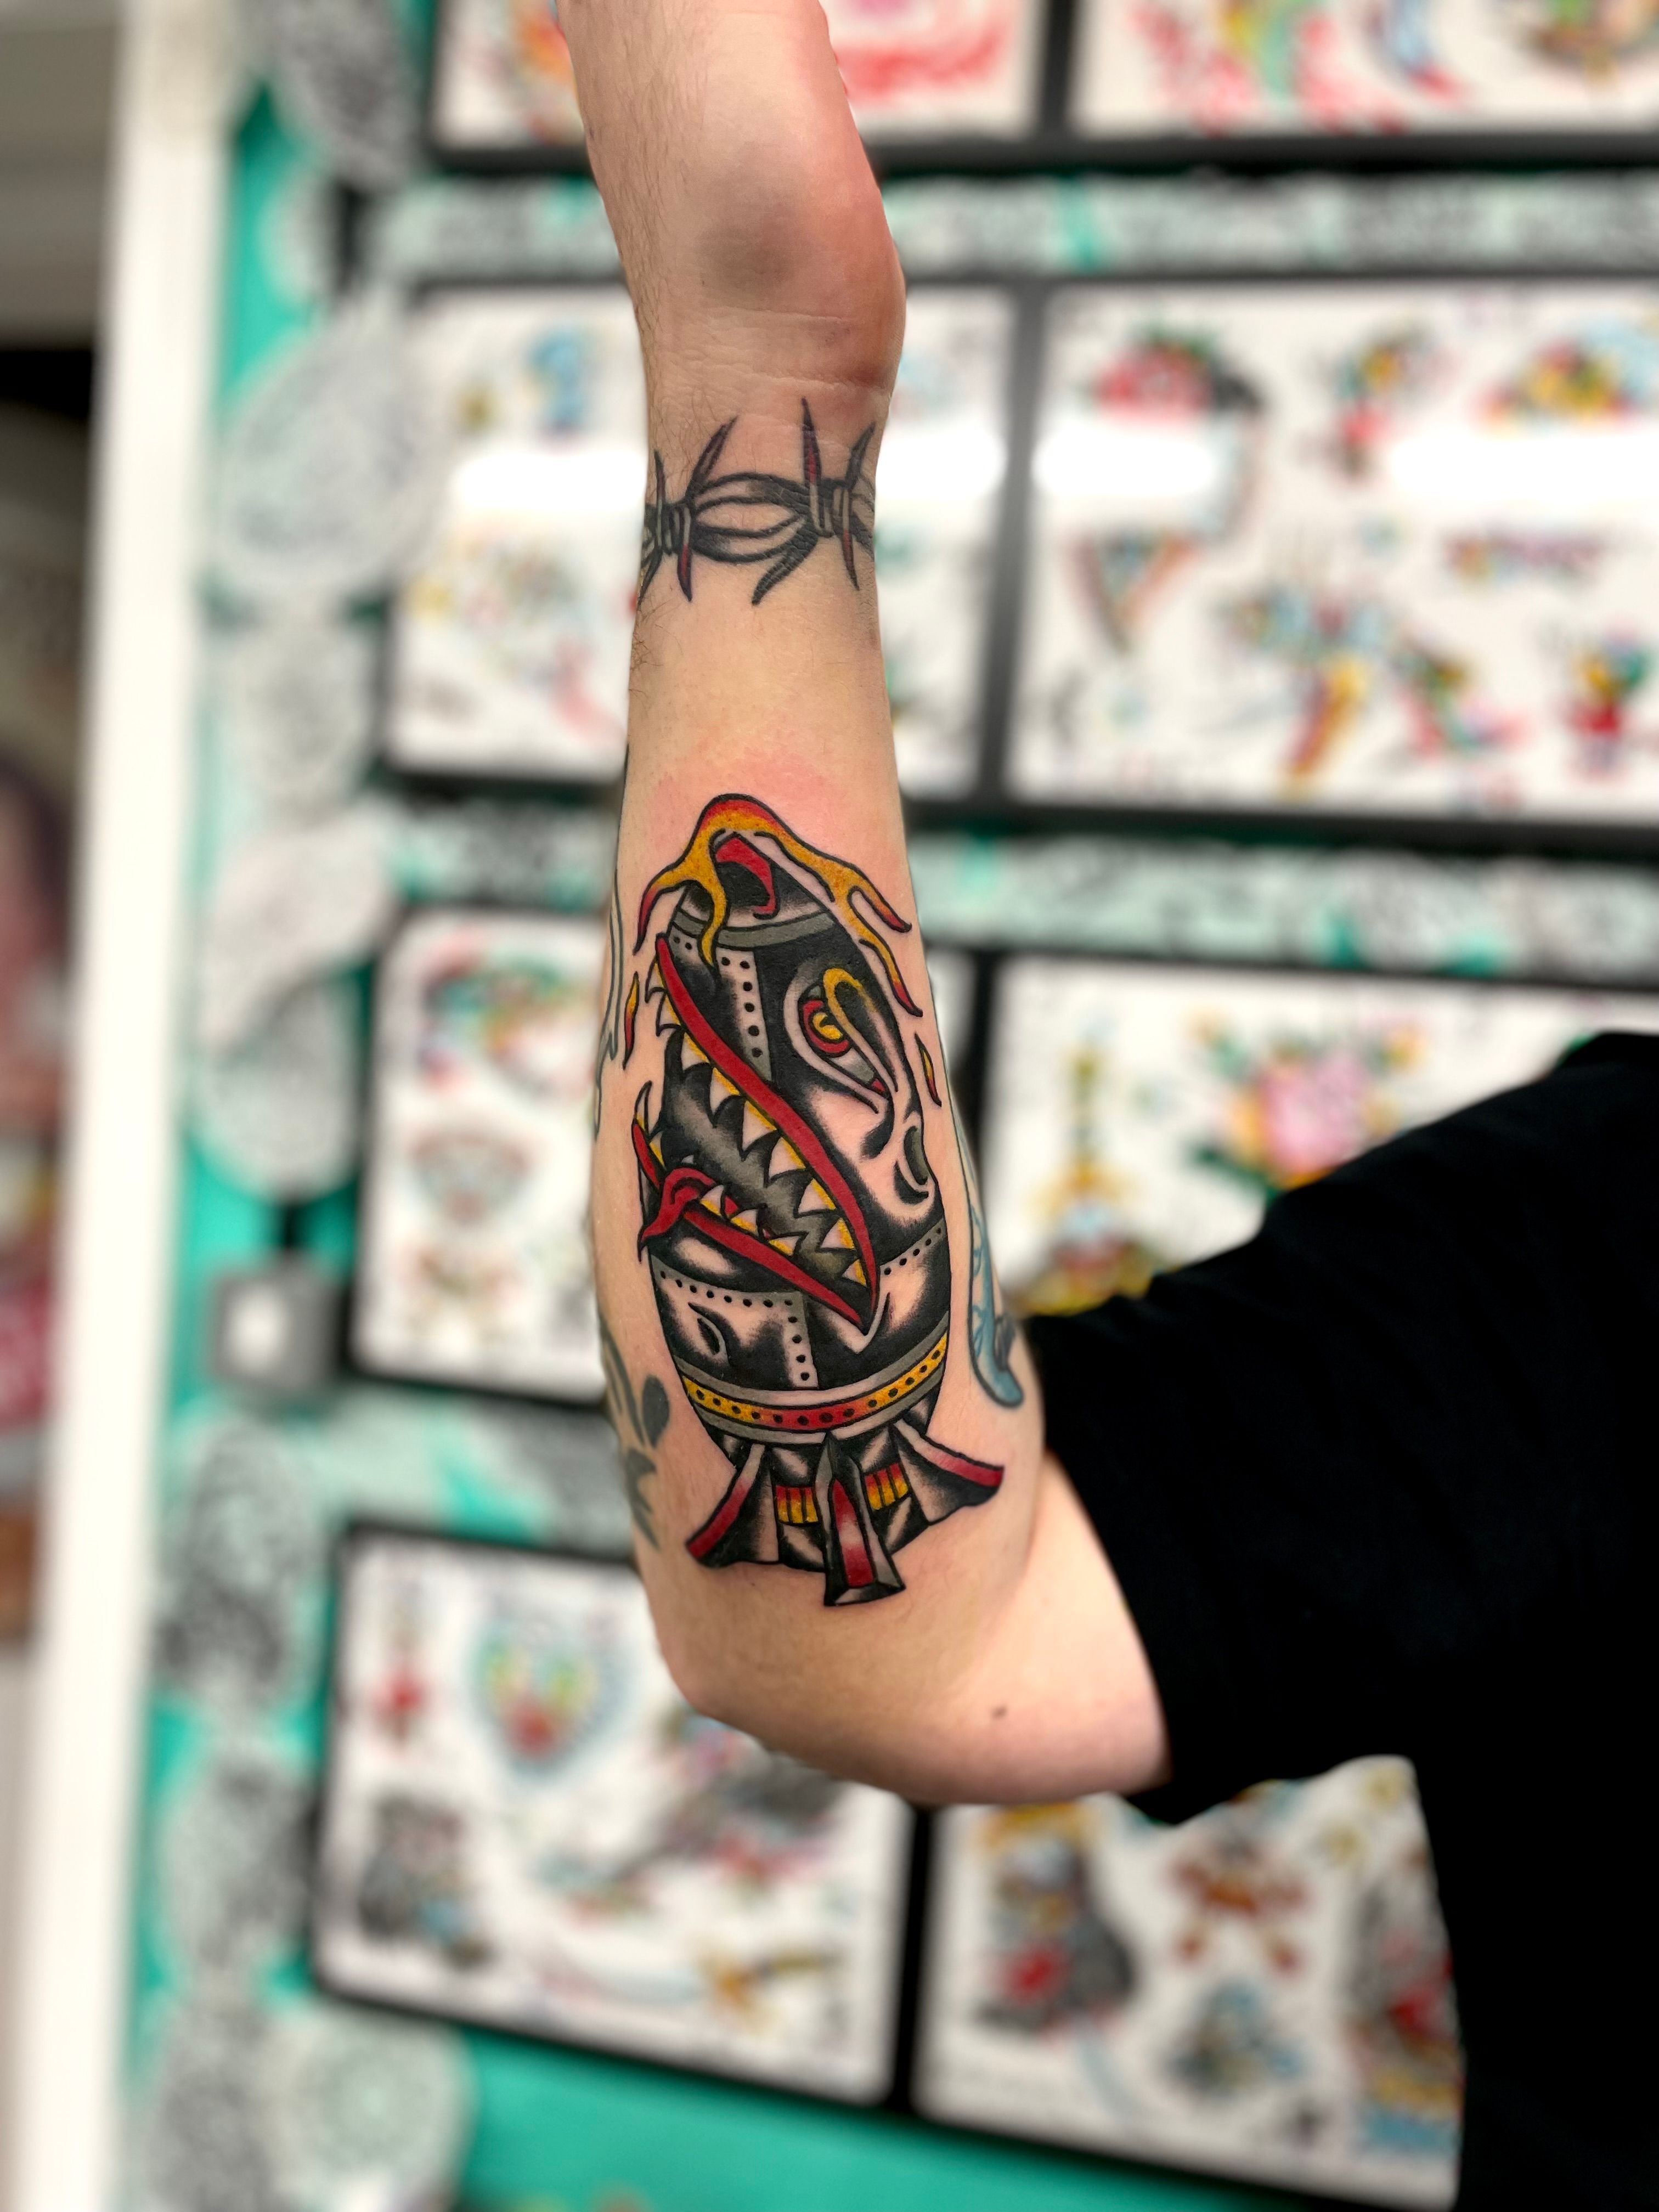 American Traditional Tattoos - The Honorable Society Los Angeles